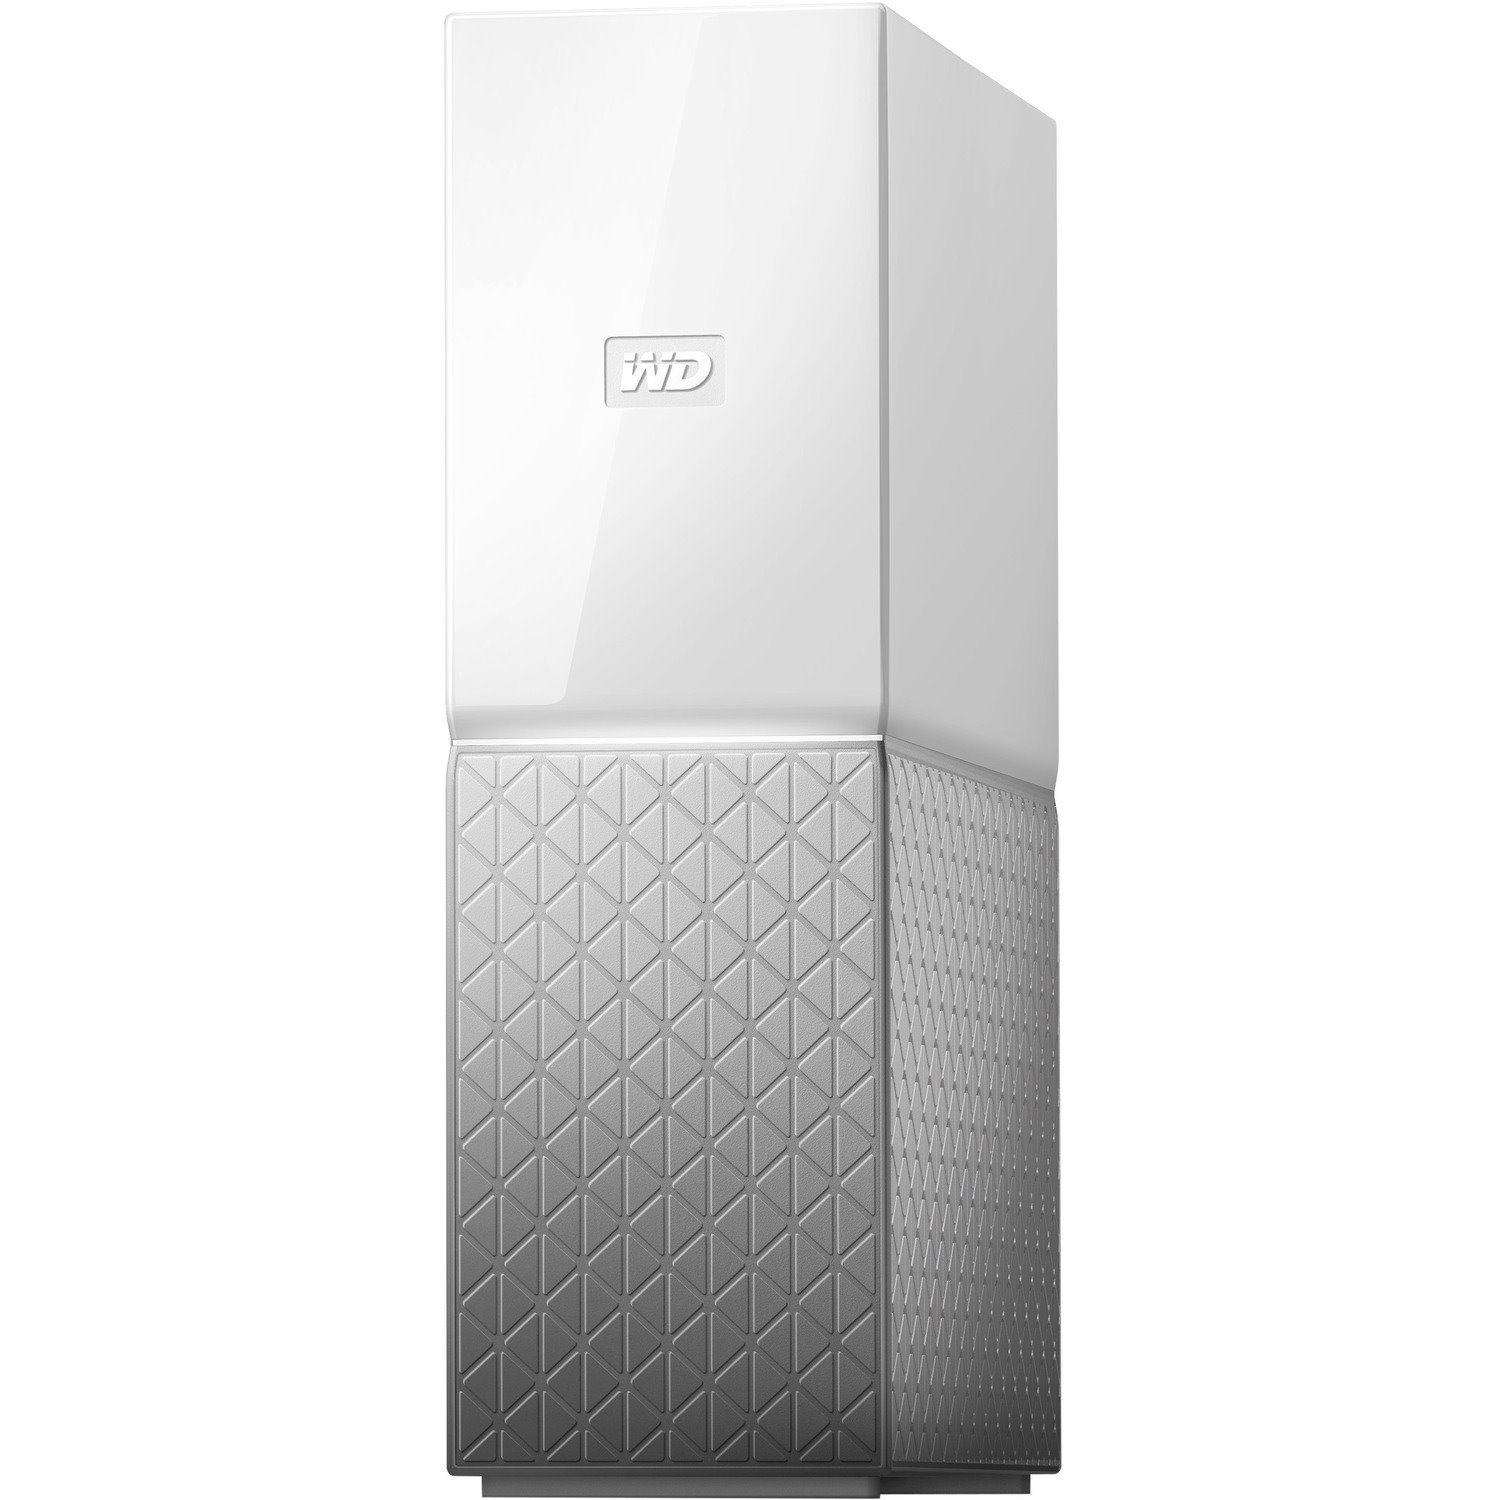 WD My Cloud Home Personal Cloud Storage